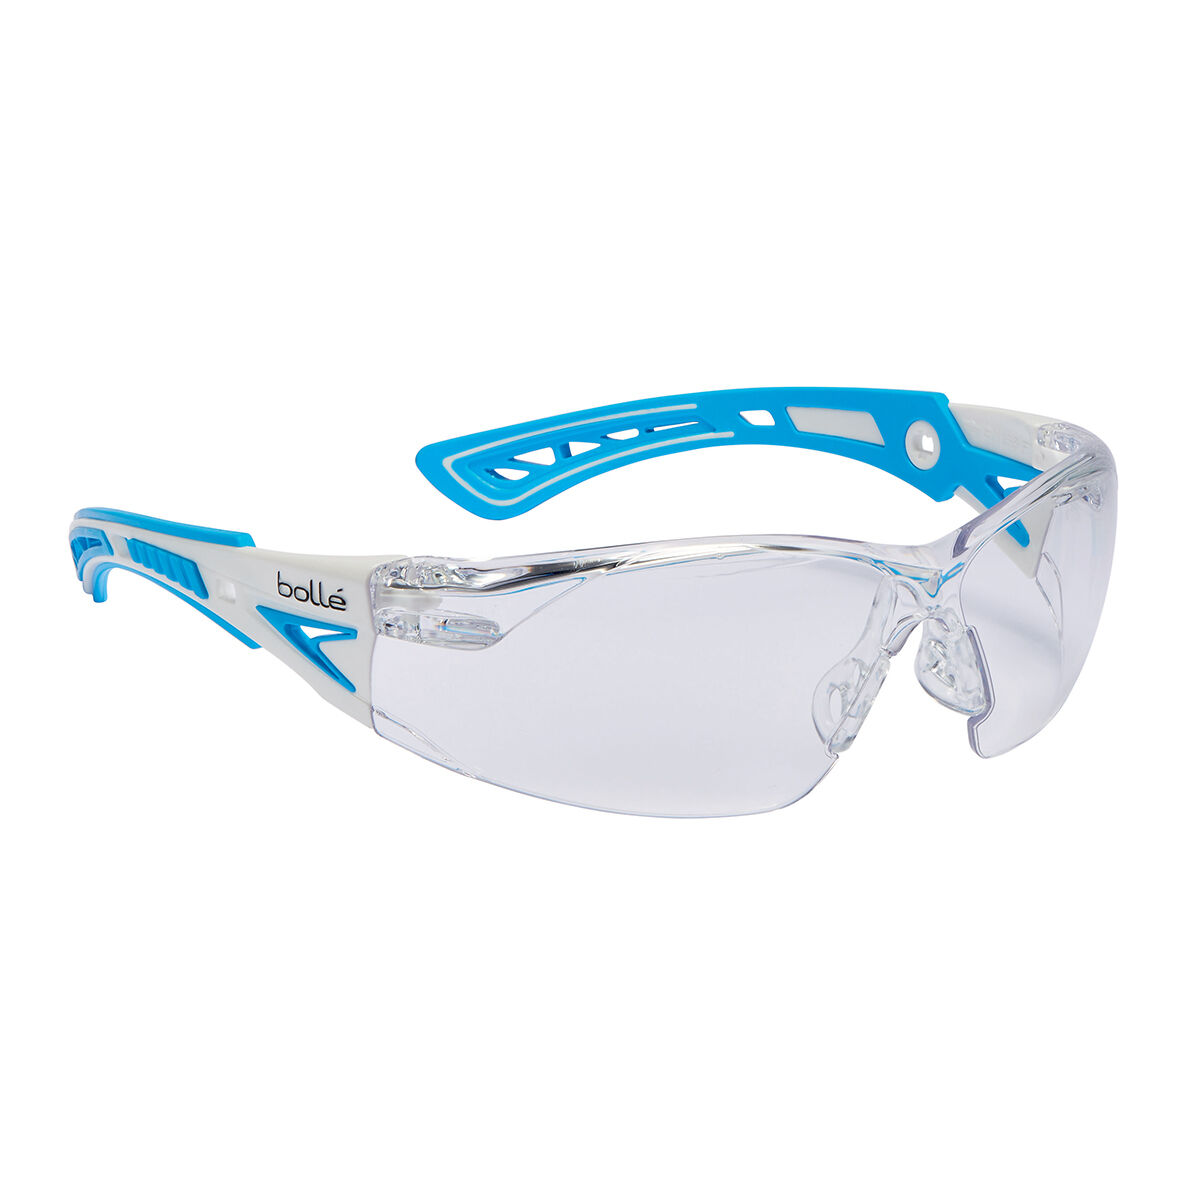 Safety Glasses Spectacles Goggles Eye Protection Platinum Coating Bolle RUSH 